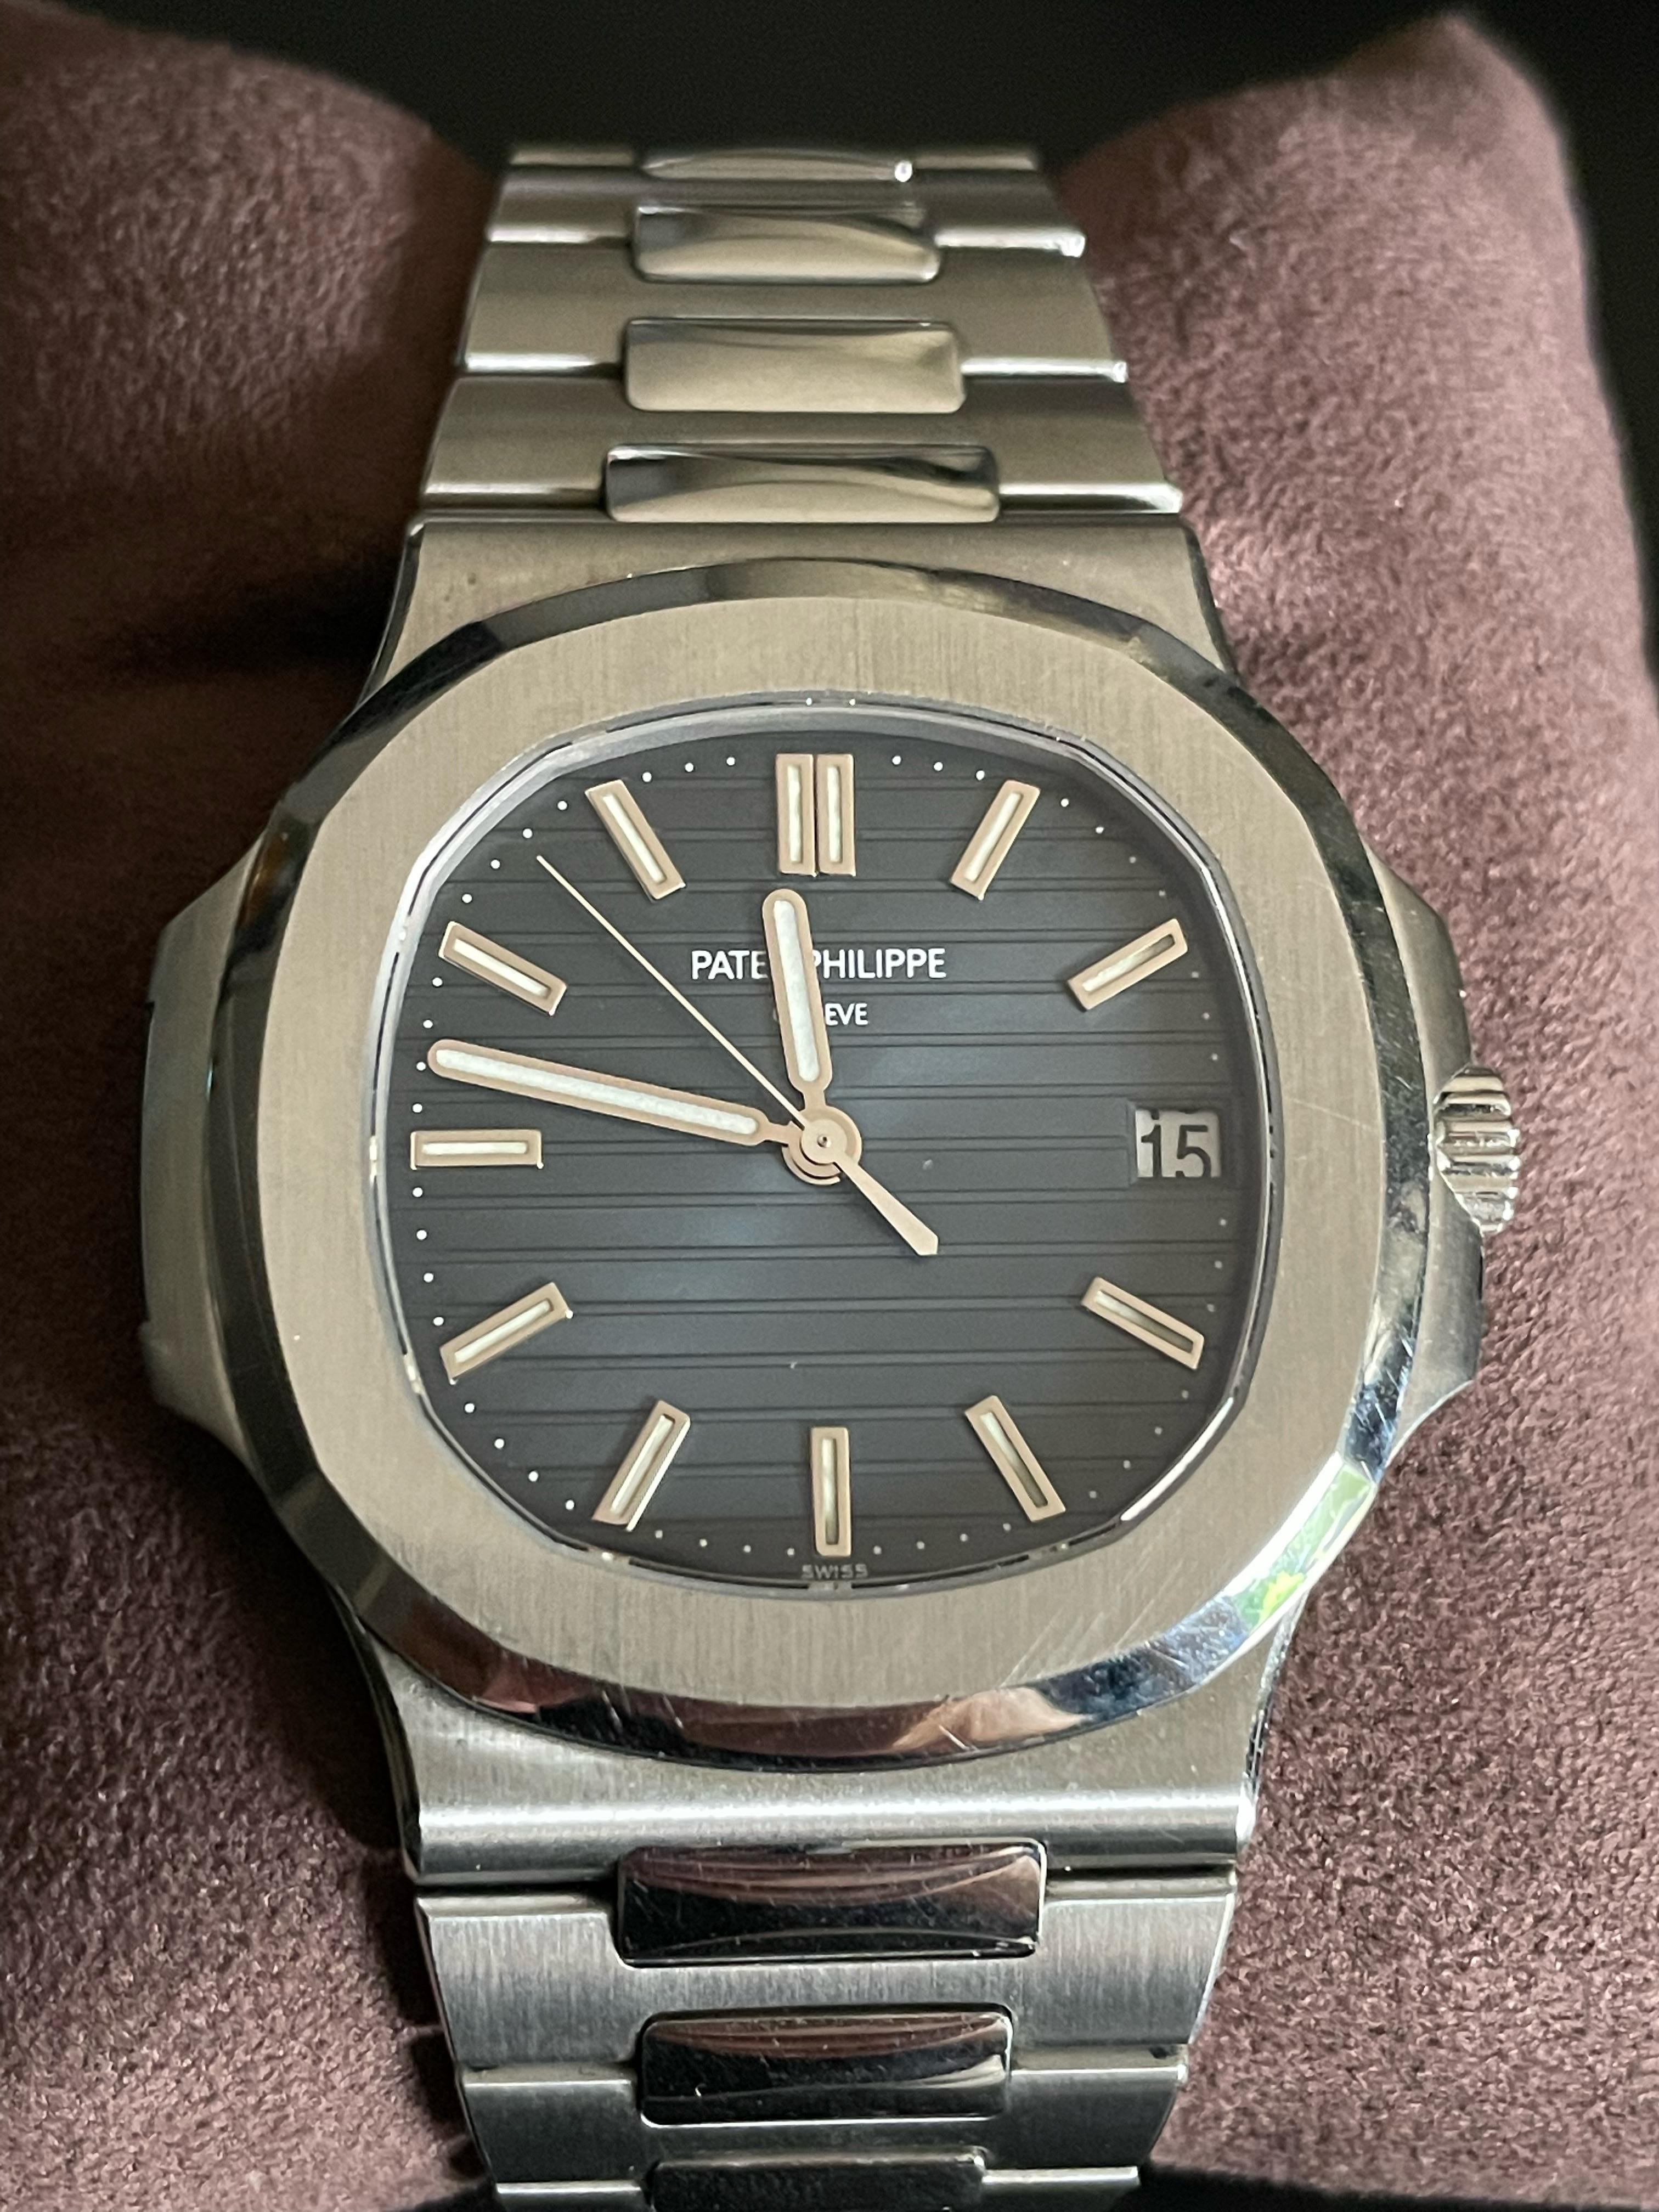 Amazing and iconic Patek Philippe Nautilus
Steel
Movement: automatic
Function: hours, minutes, seconds, date
Case: 38.4mm stainless steel round case,  sapphire crystal
Band: stainless steel Patek Philippe Nautilus bracelet
Reference: 5711/1A